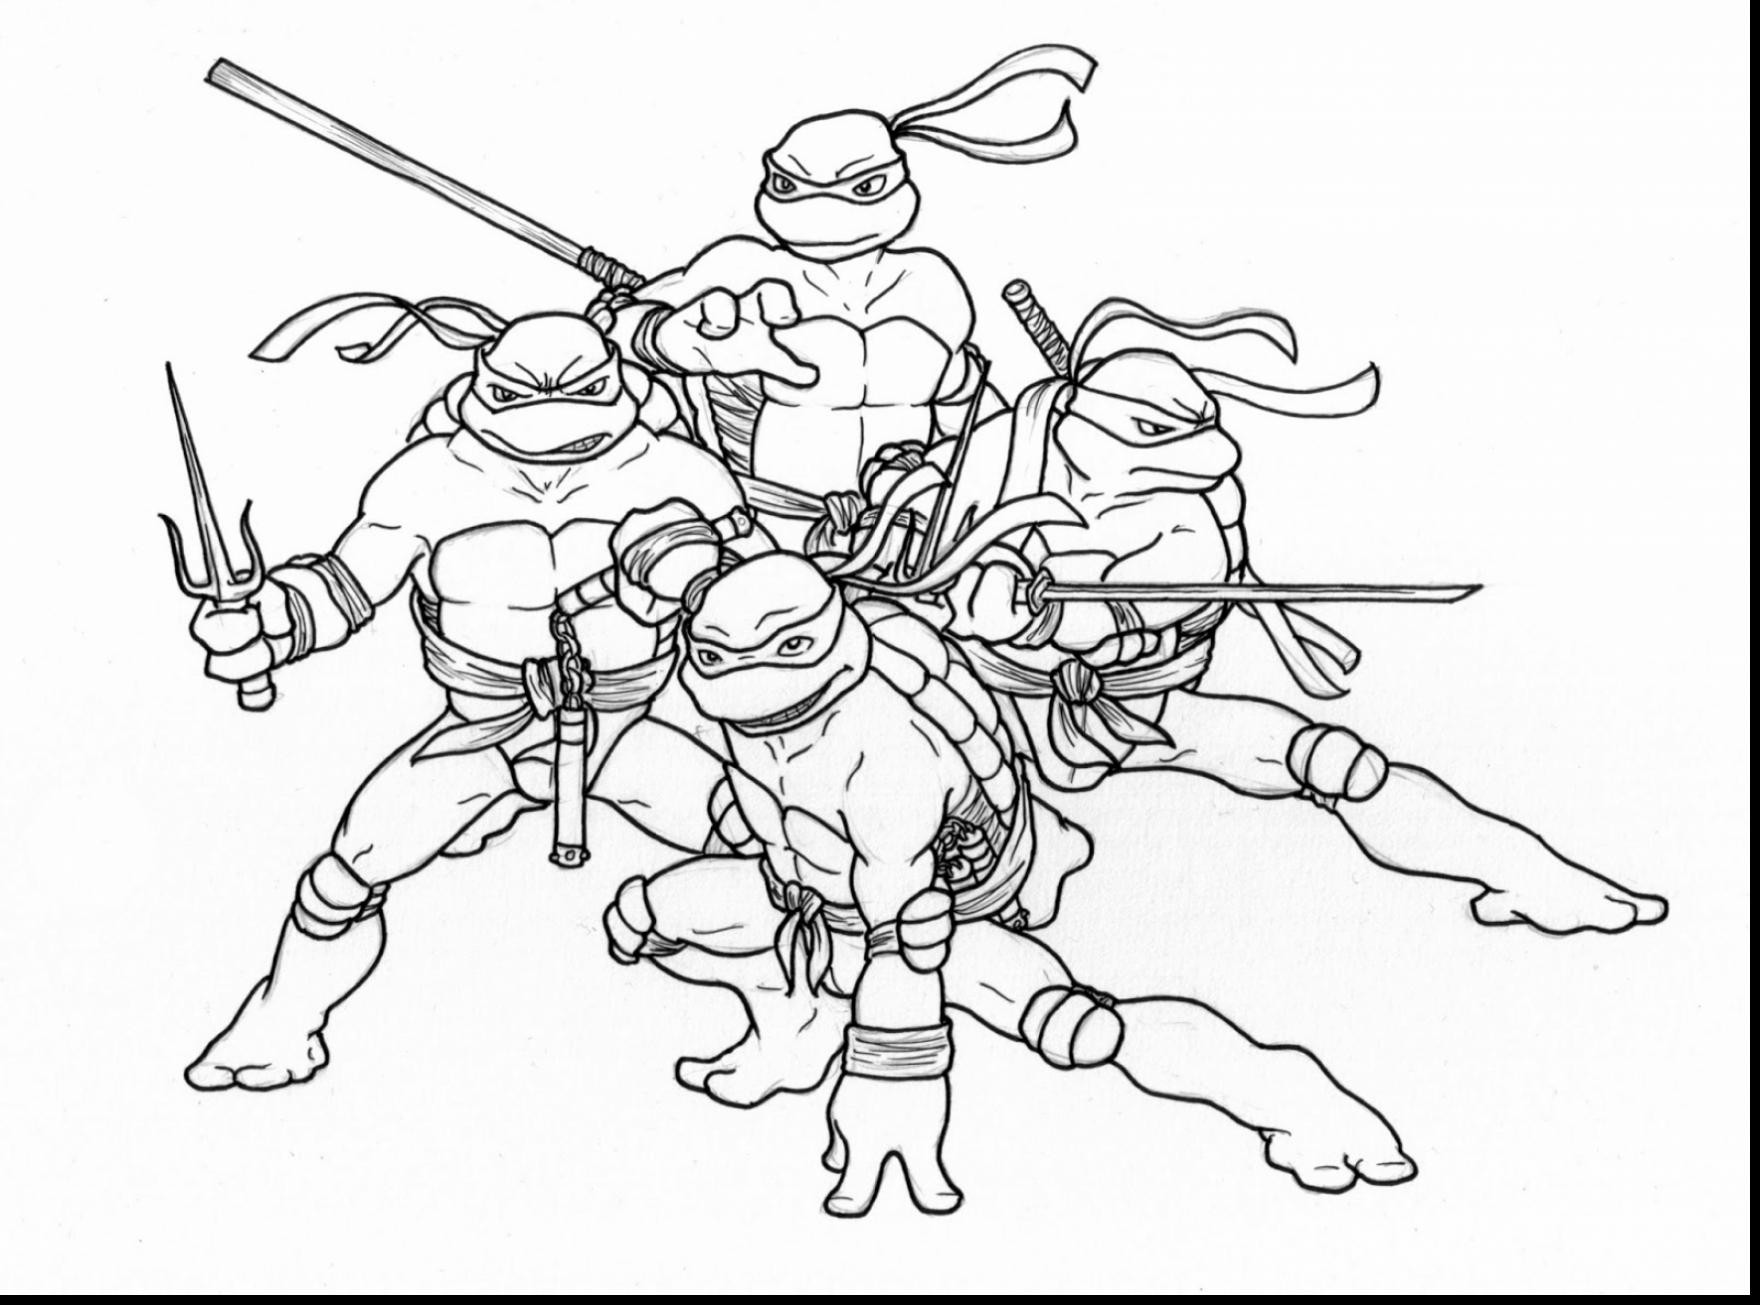 Ninja Turtle Drawing Pictures at GetDrawings | Free download